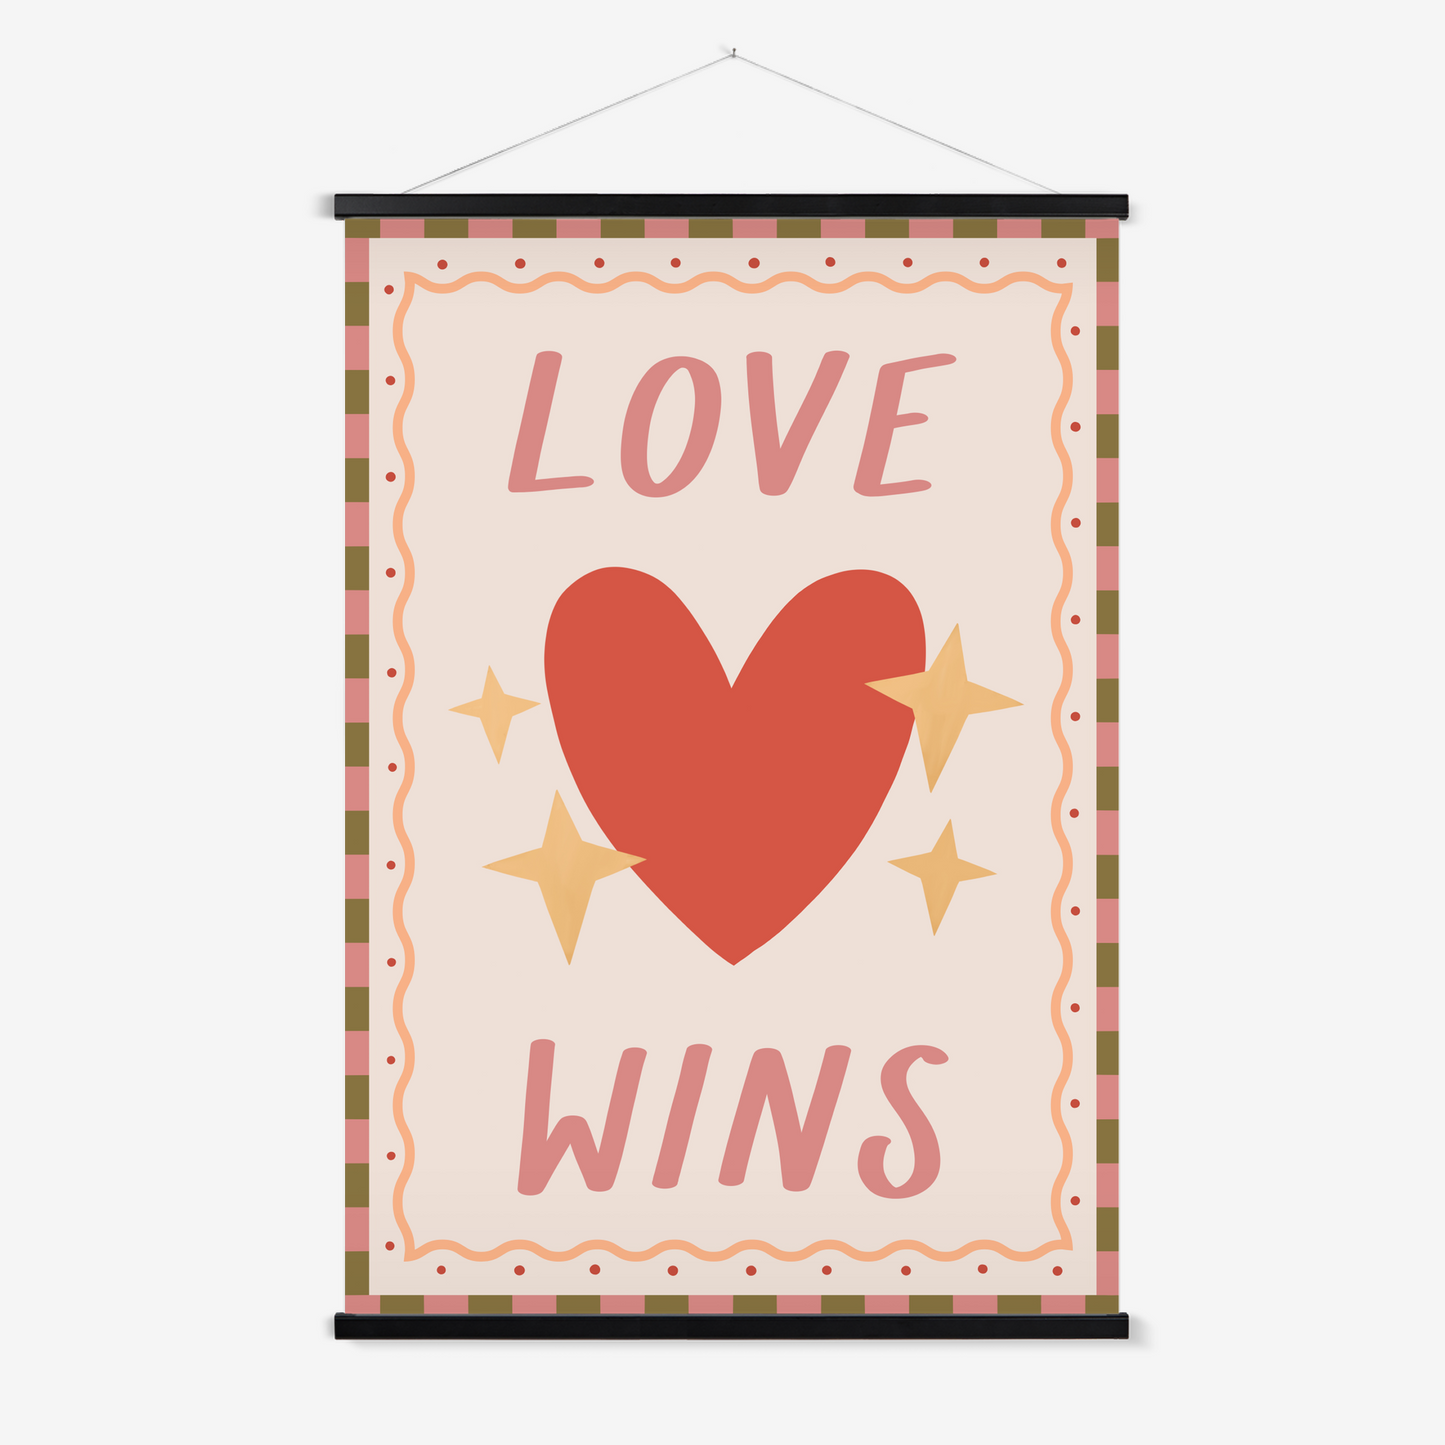 Love Wins / Print with Hanger